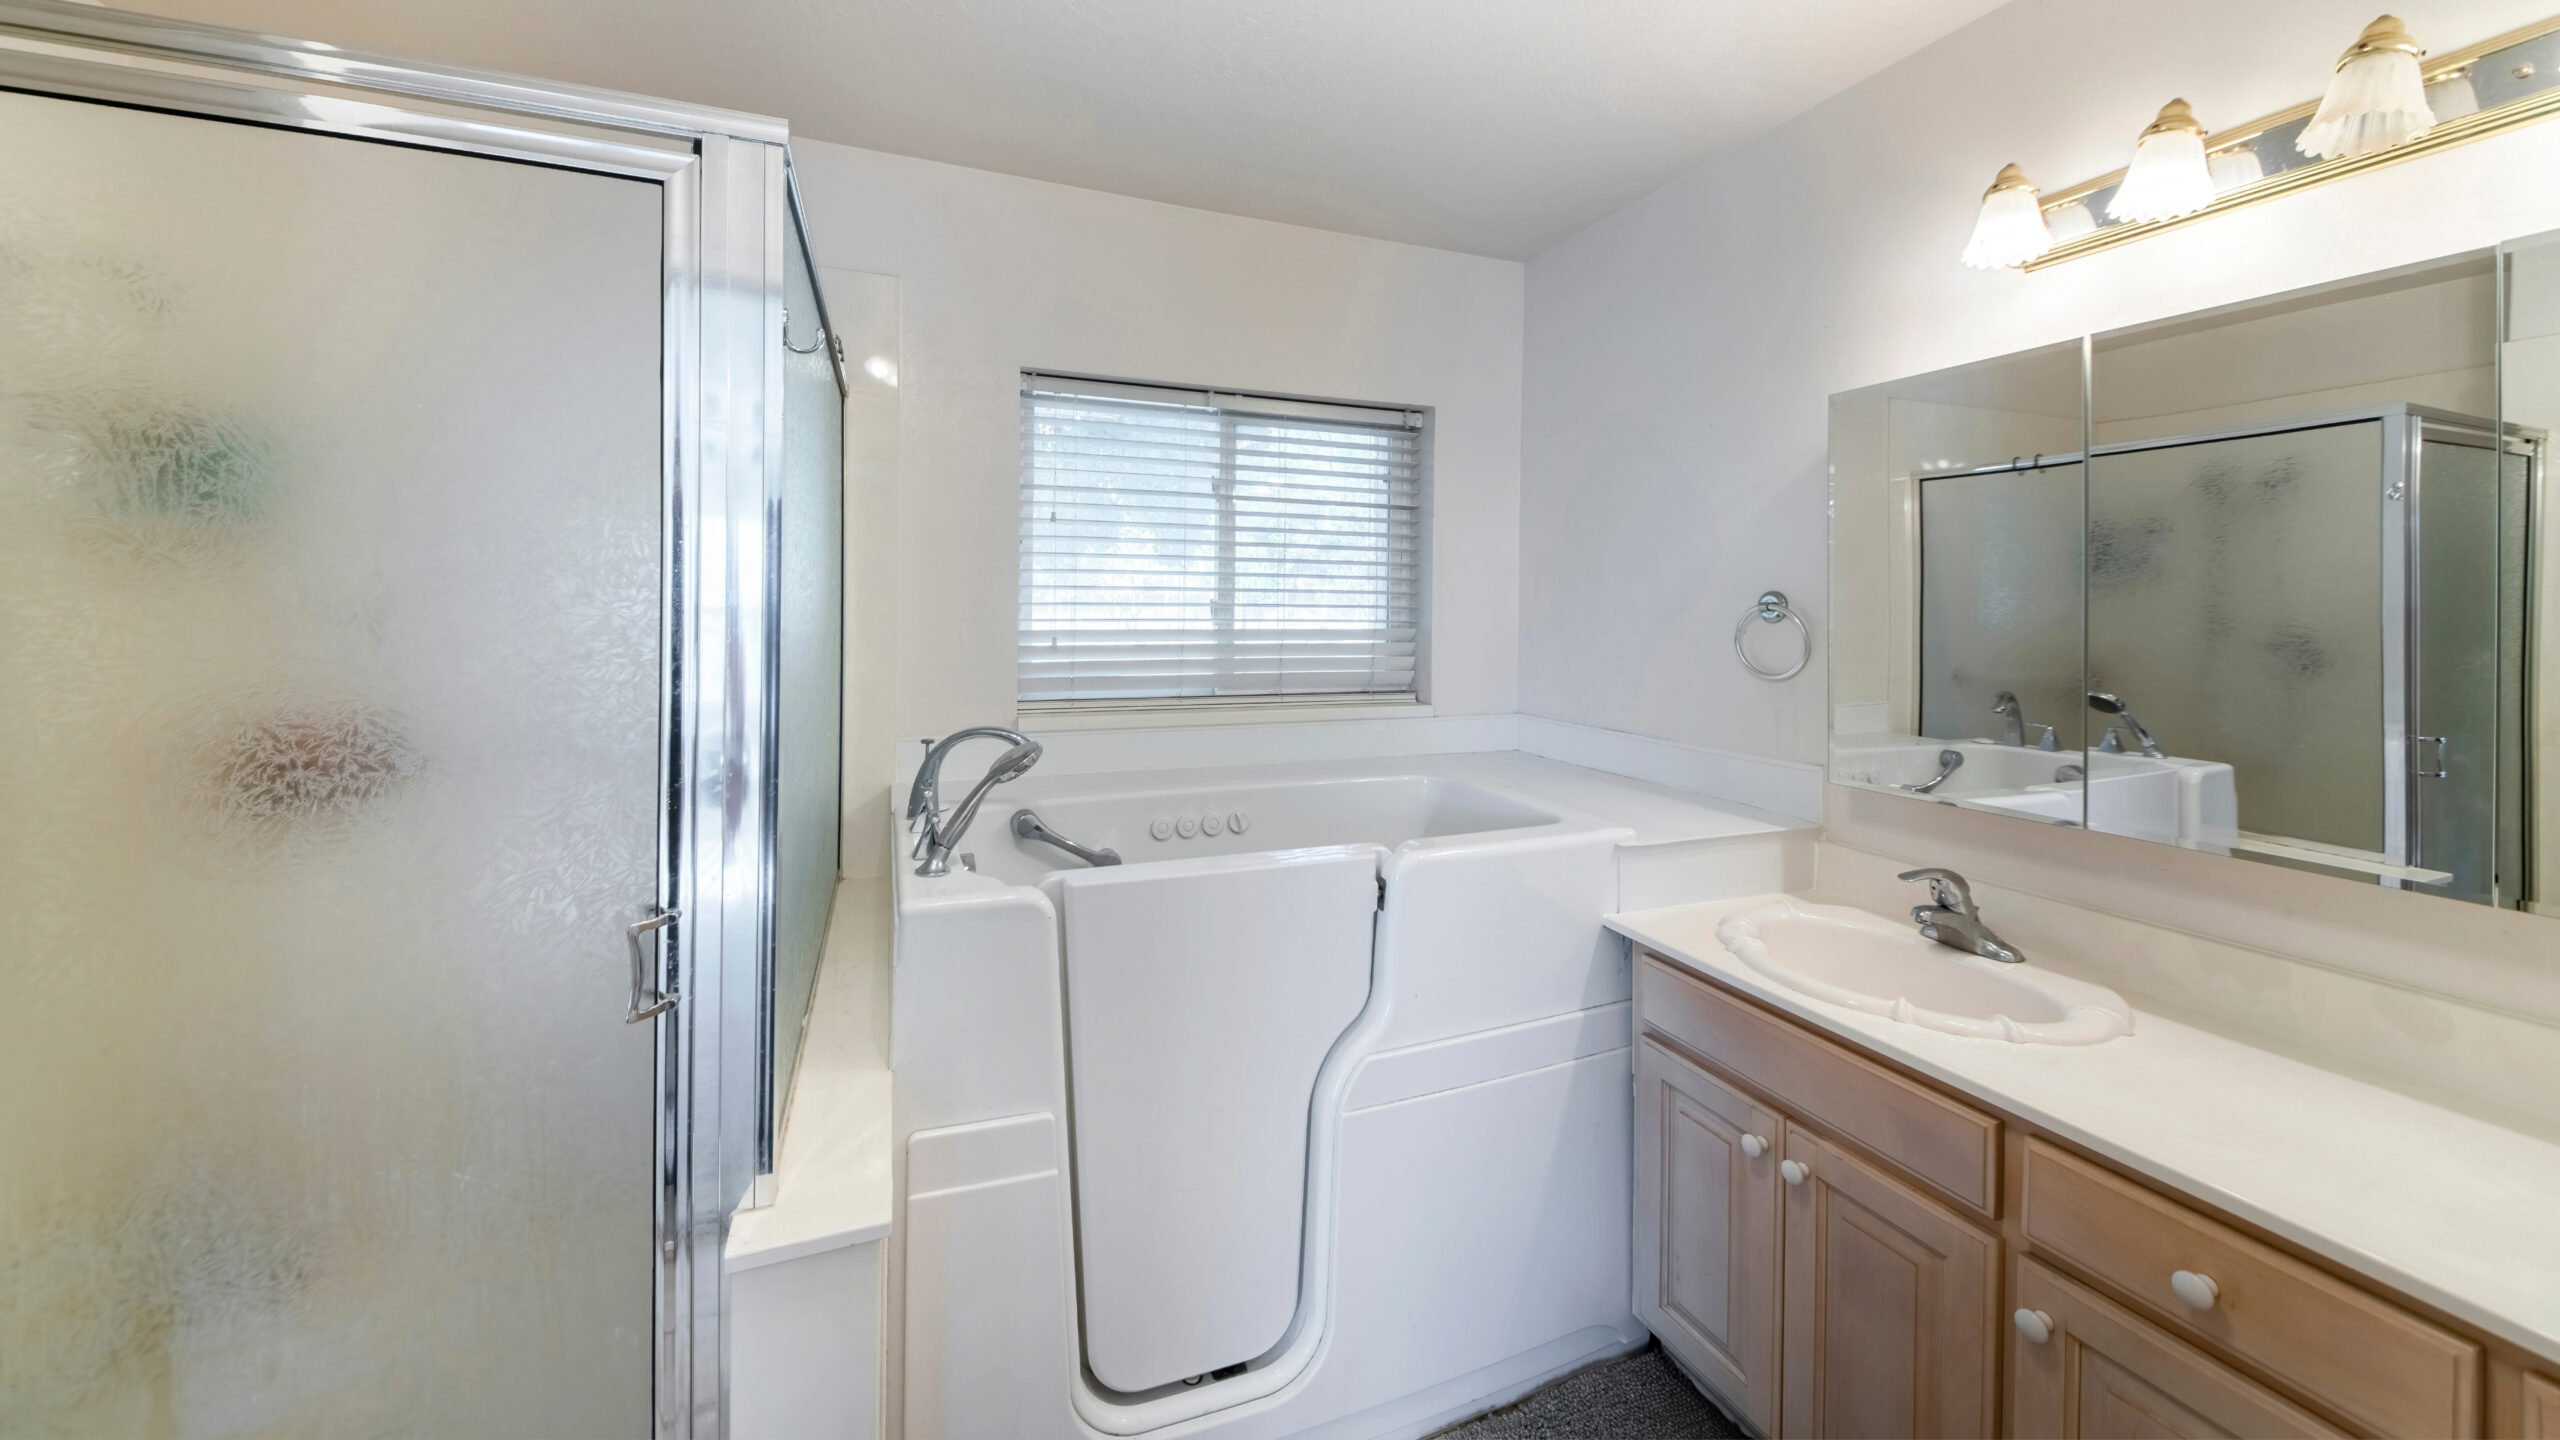 A white walk-in tub next to a walk-in shower